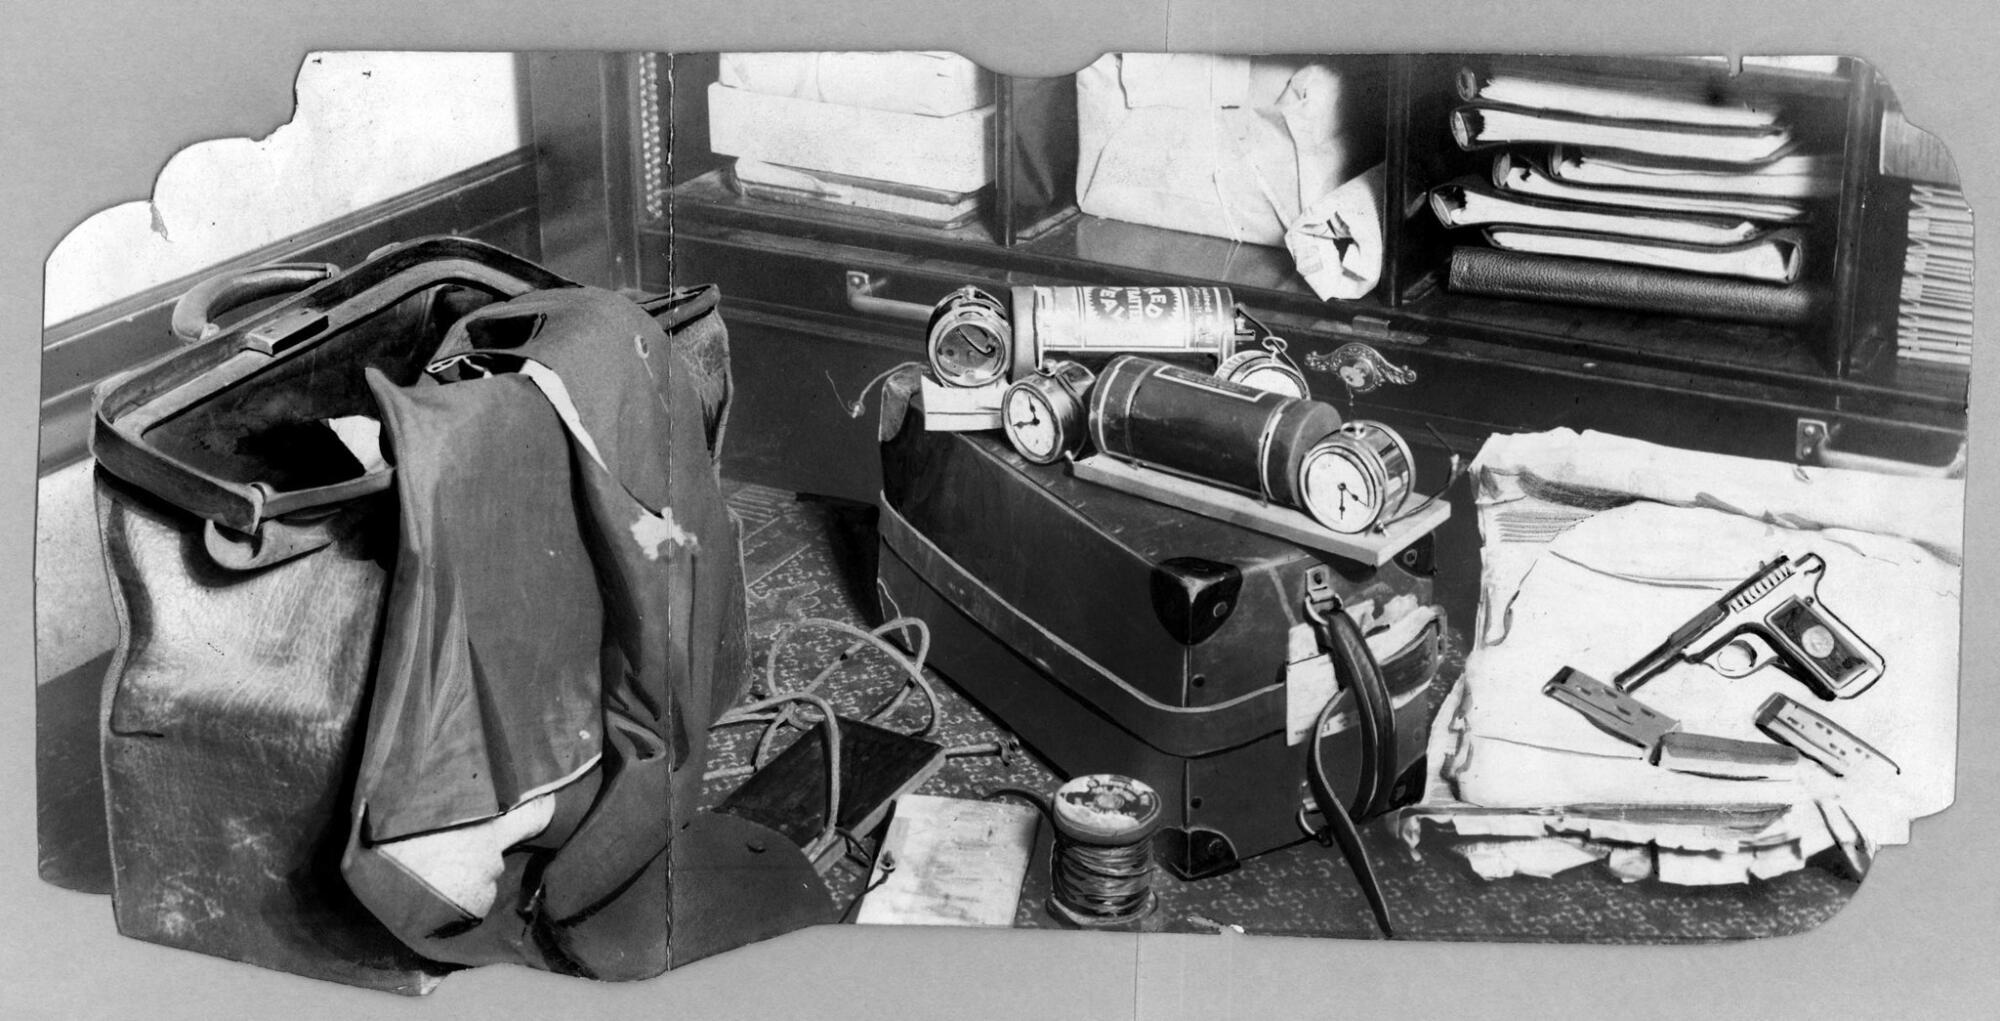 A black-and-white photograph of a leather bag alongside wires and other supplies that can be used to make bombs